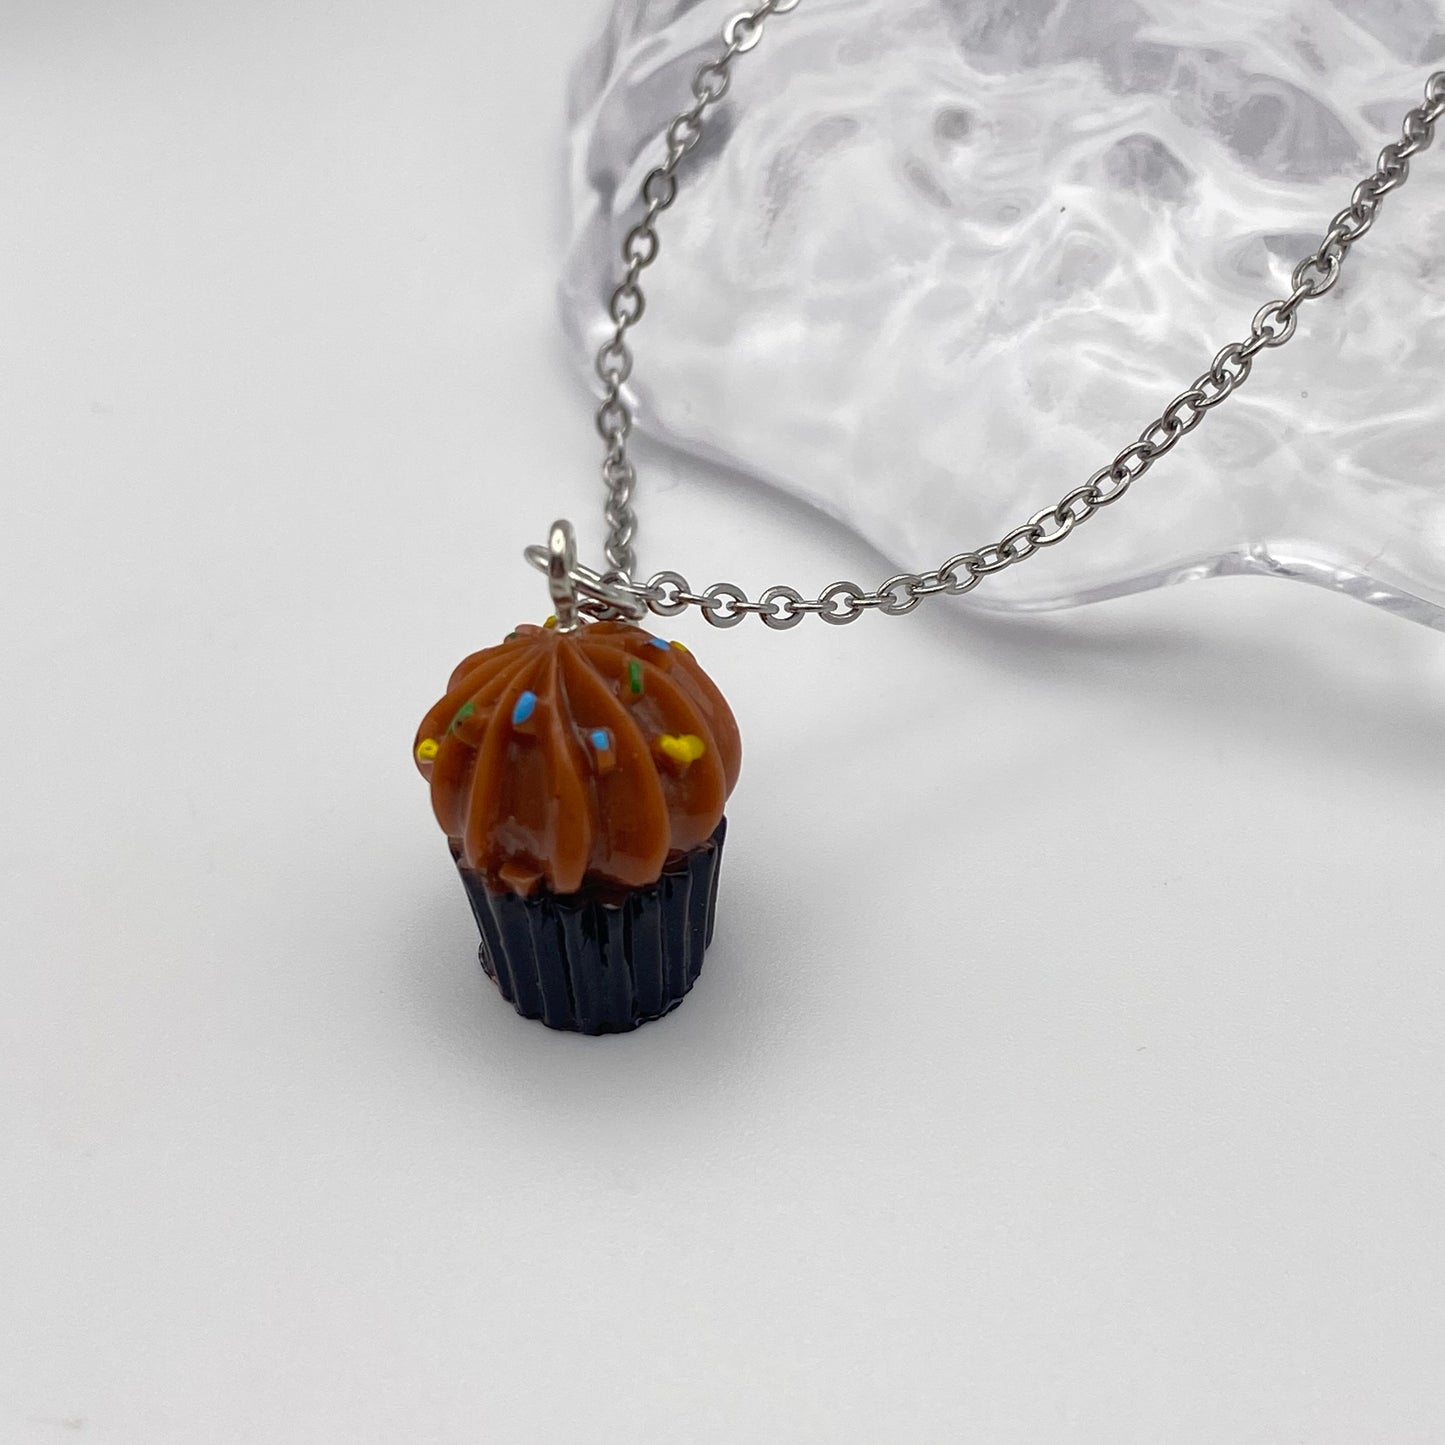 Chocolate Icing Cupcake Necklace